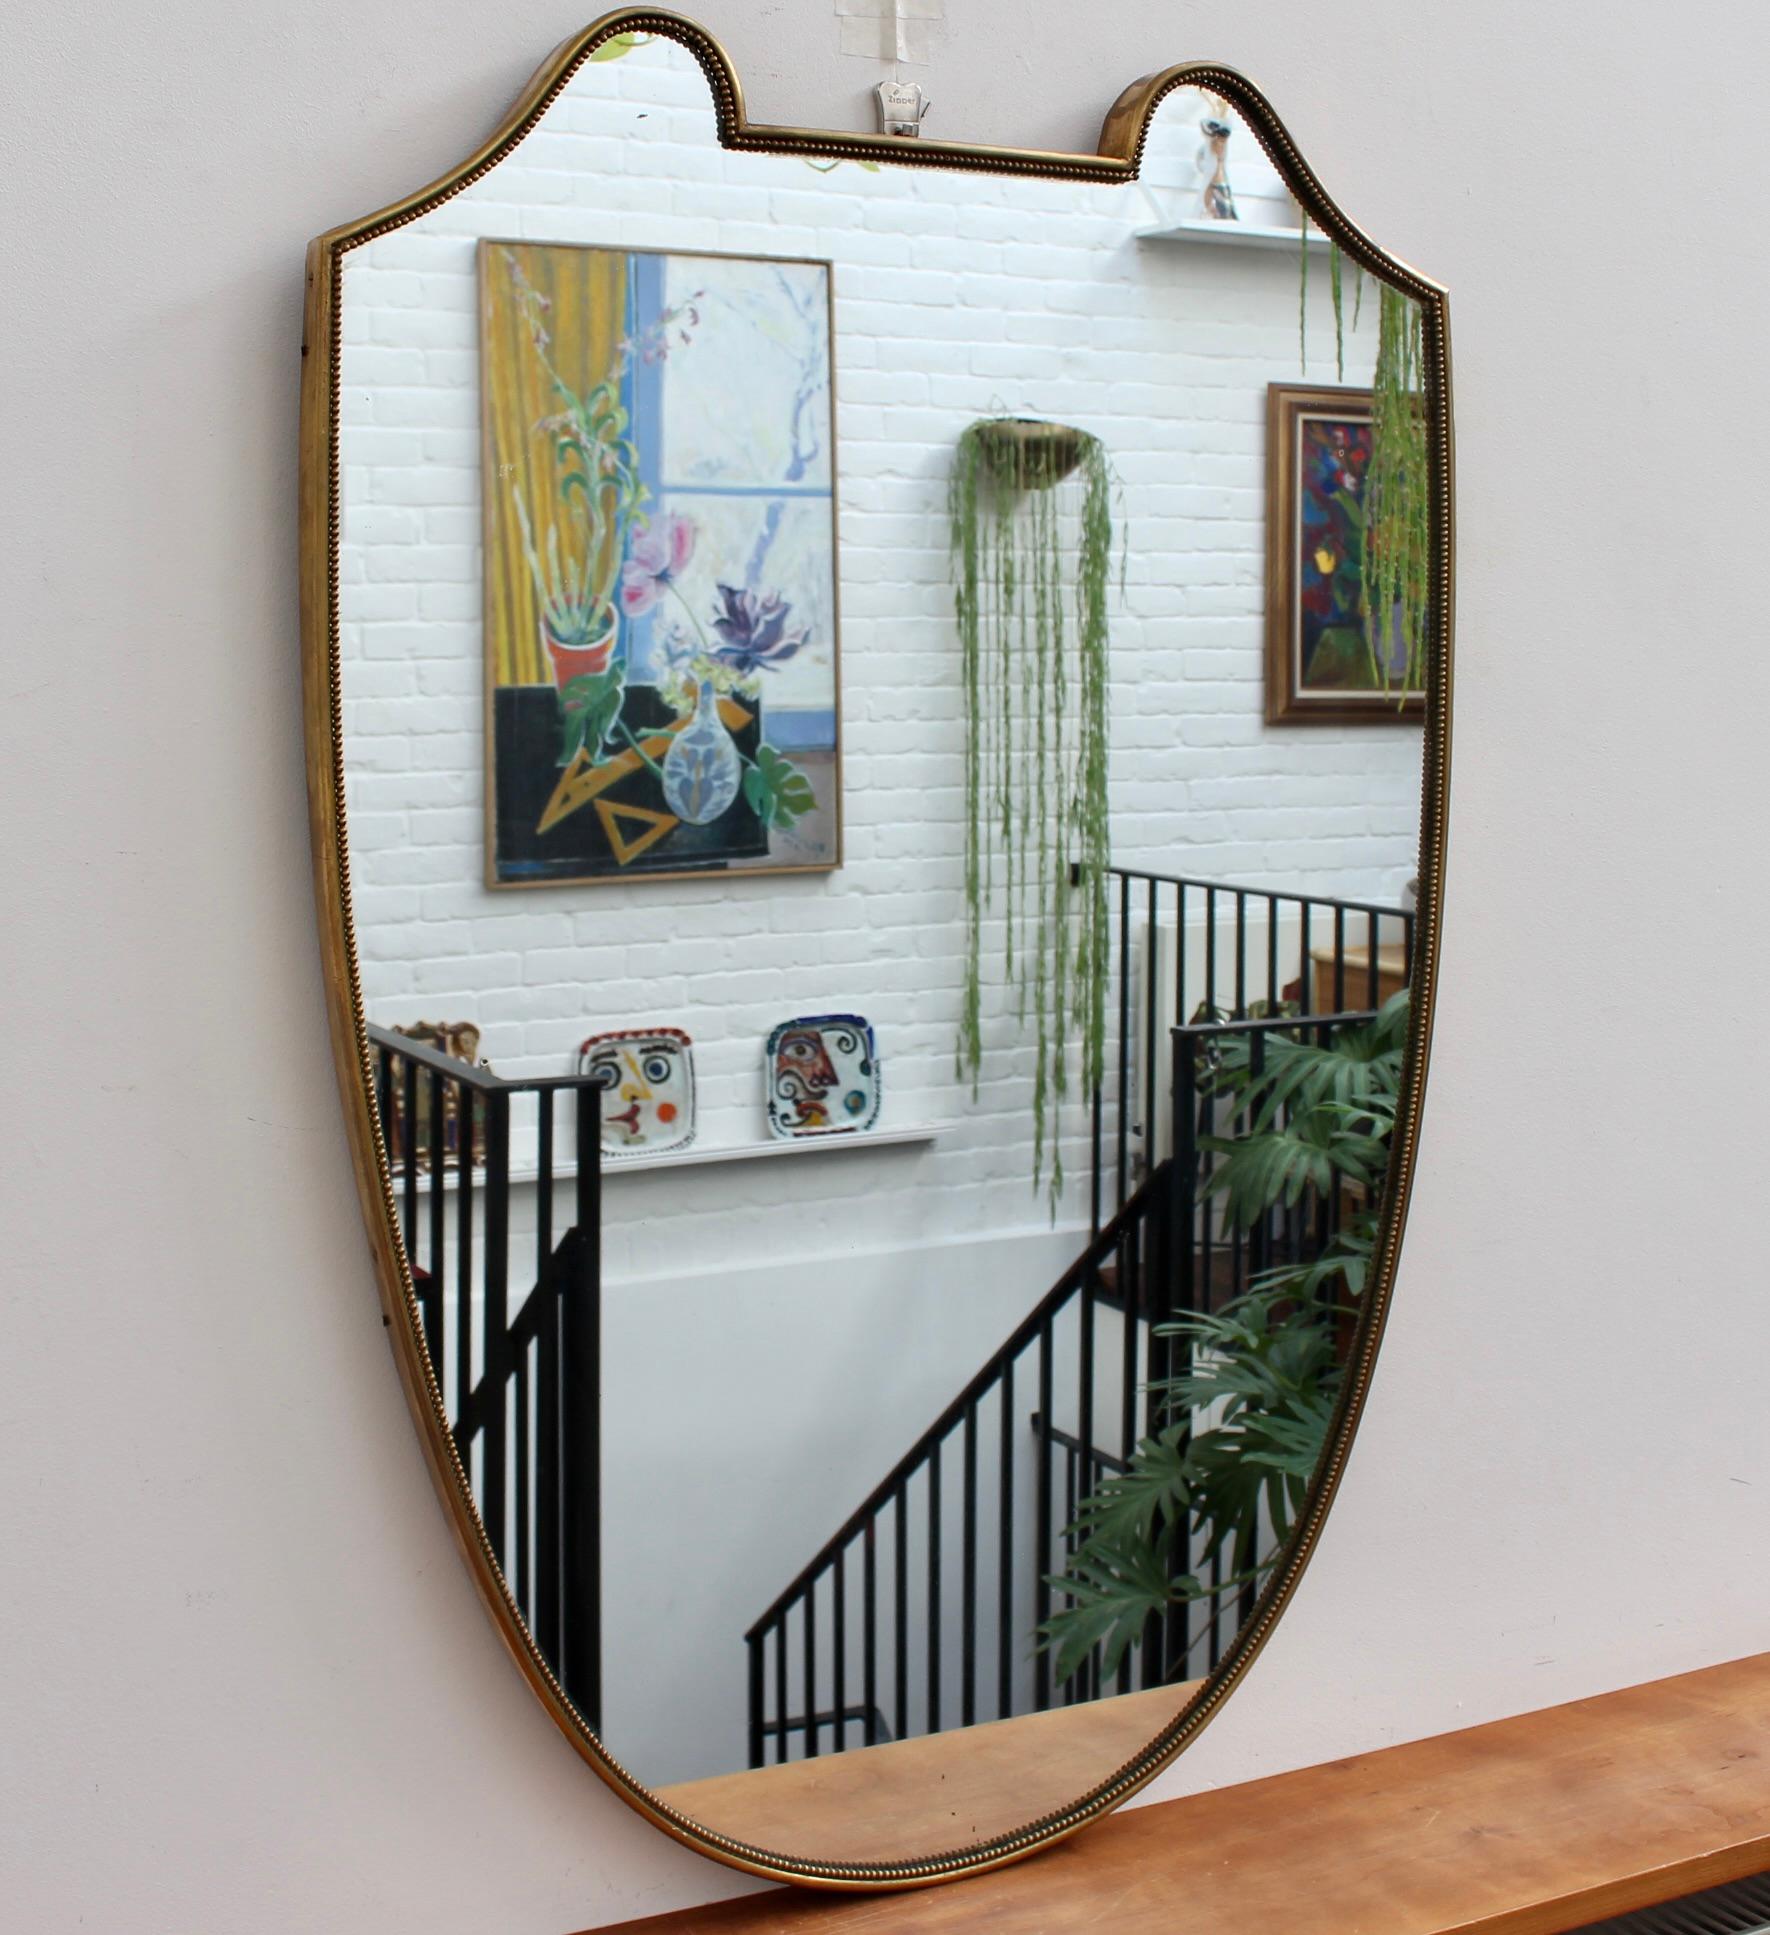 Vintage Italian wall mirror with brass frame (circa 1950s). The crest-shaped mirror is substantial with beading and sensuous curves, like ears, crowning the piece. It exudes character, solidity, weightiness and has eye-catching good looks. The two